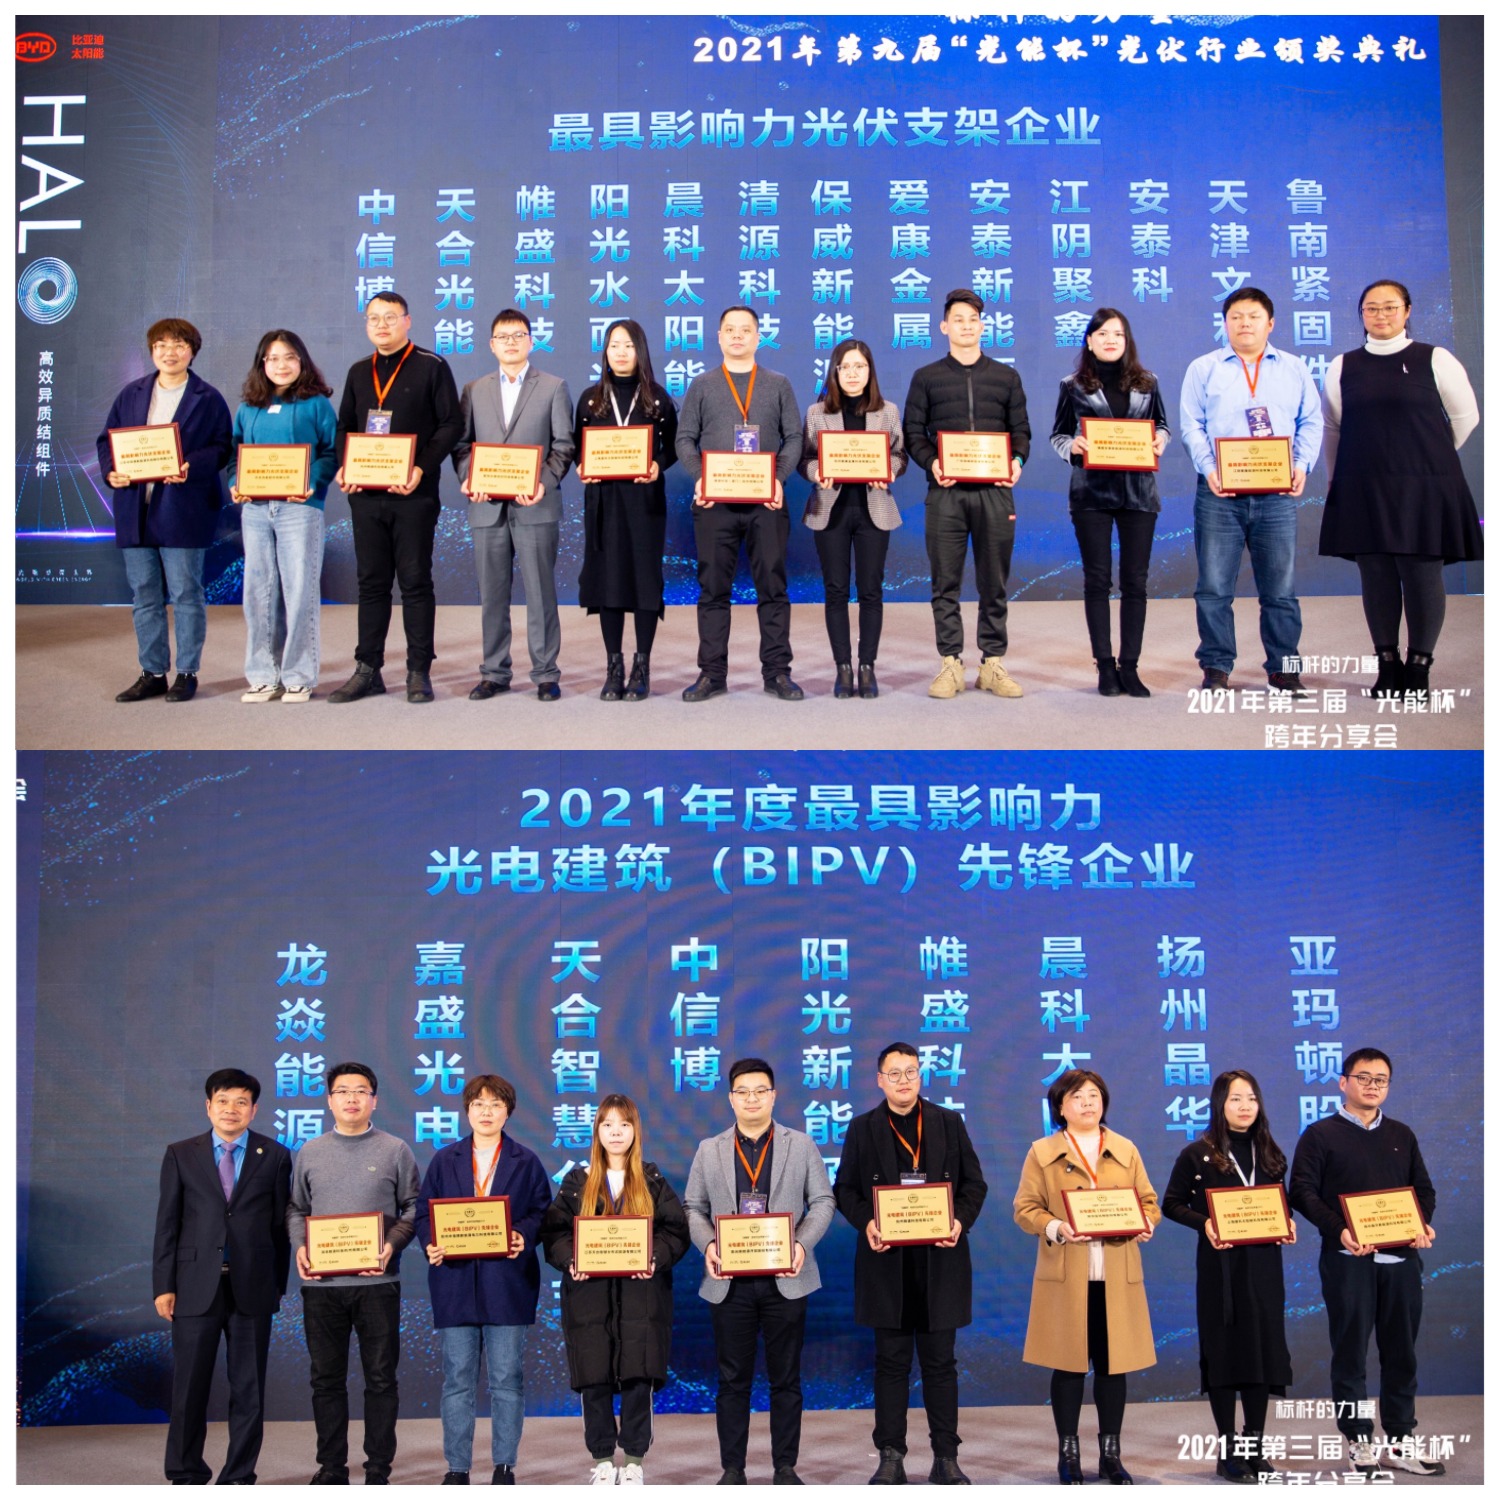 CHIKO Solar won two awards for "Light Energy Cup" Most Influential Photovoltaic Mounting/Photovoltaic Building (BIPV) Pioneer Enterprise